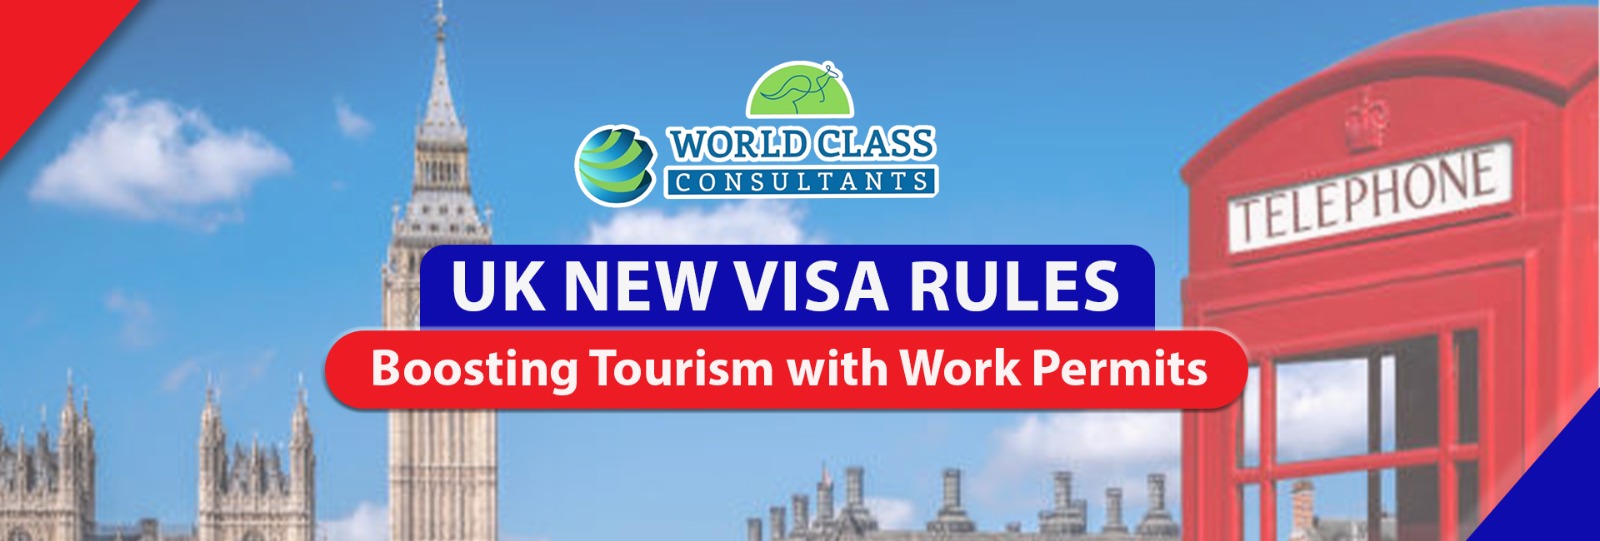 Tourists exploring UK city - showcasing new visa rules supporting work permits for tourism growth.